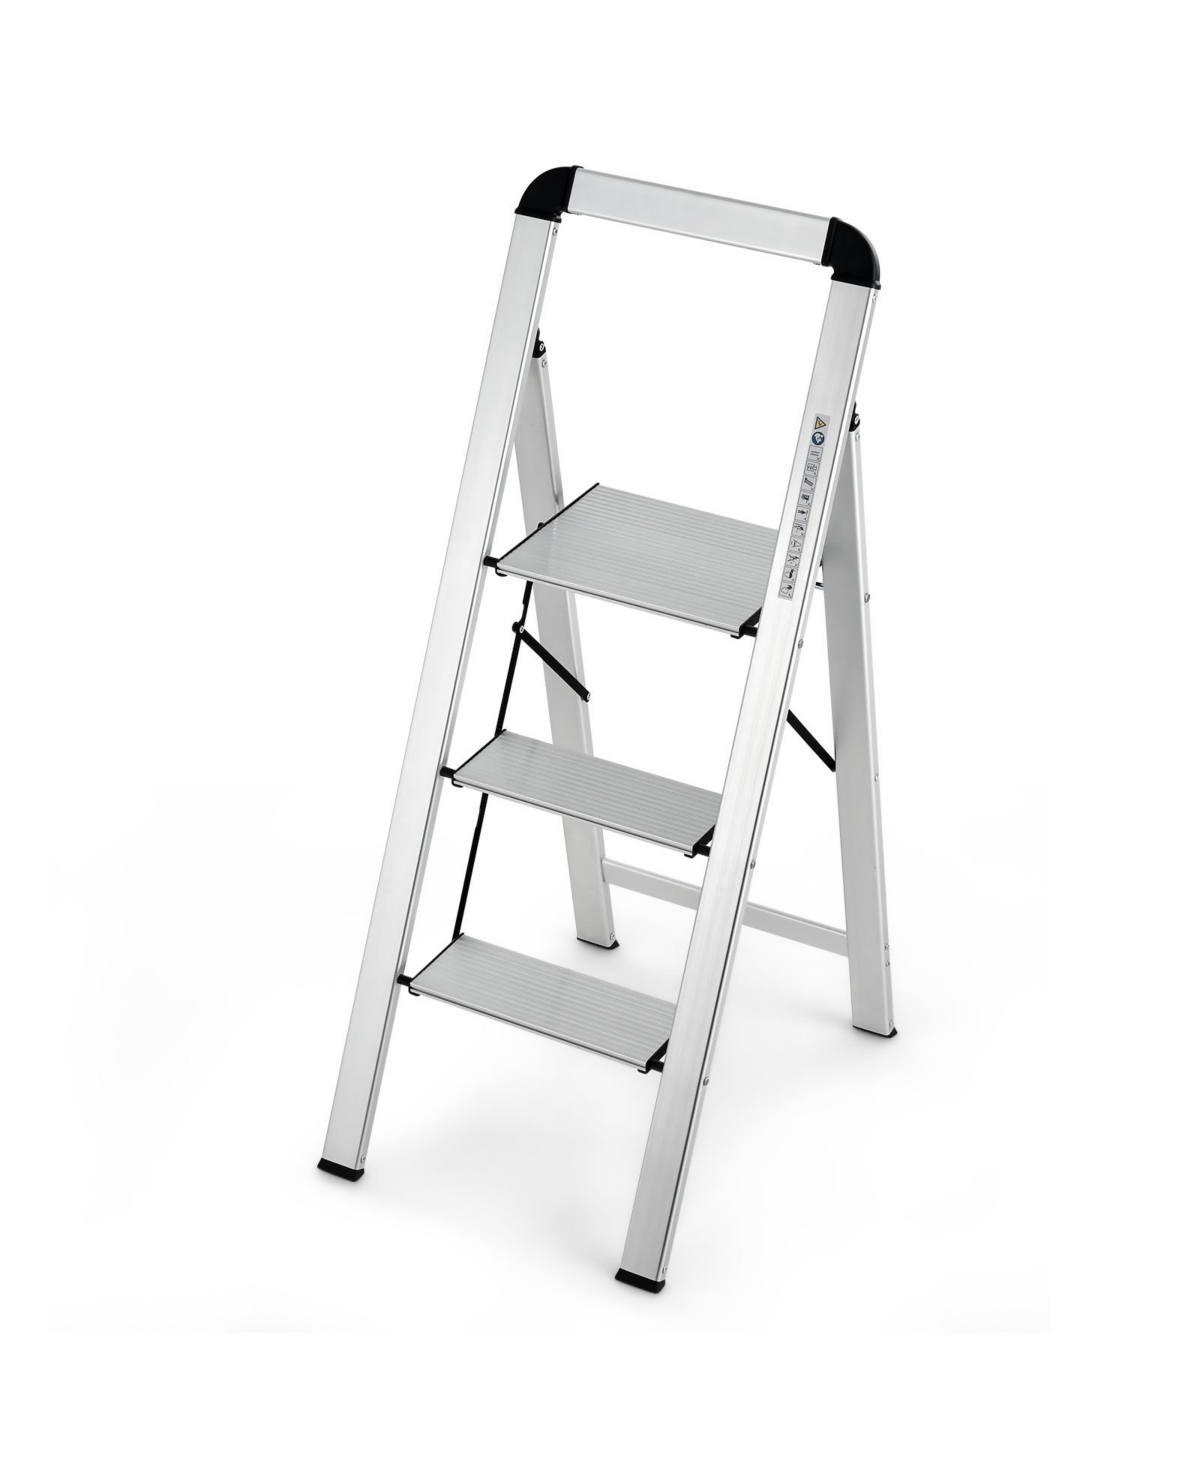 3-Step Ladder Aluminum Folding Step Stool with Non-Slip Pedal and Footpads-Sliver - Silver